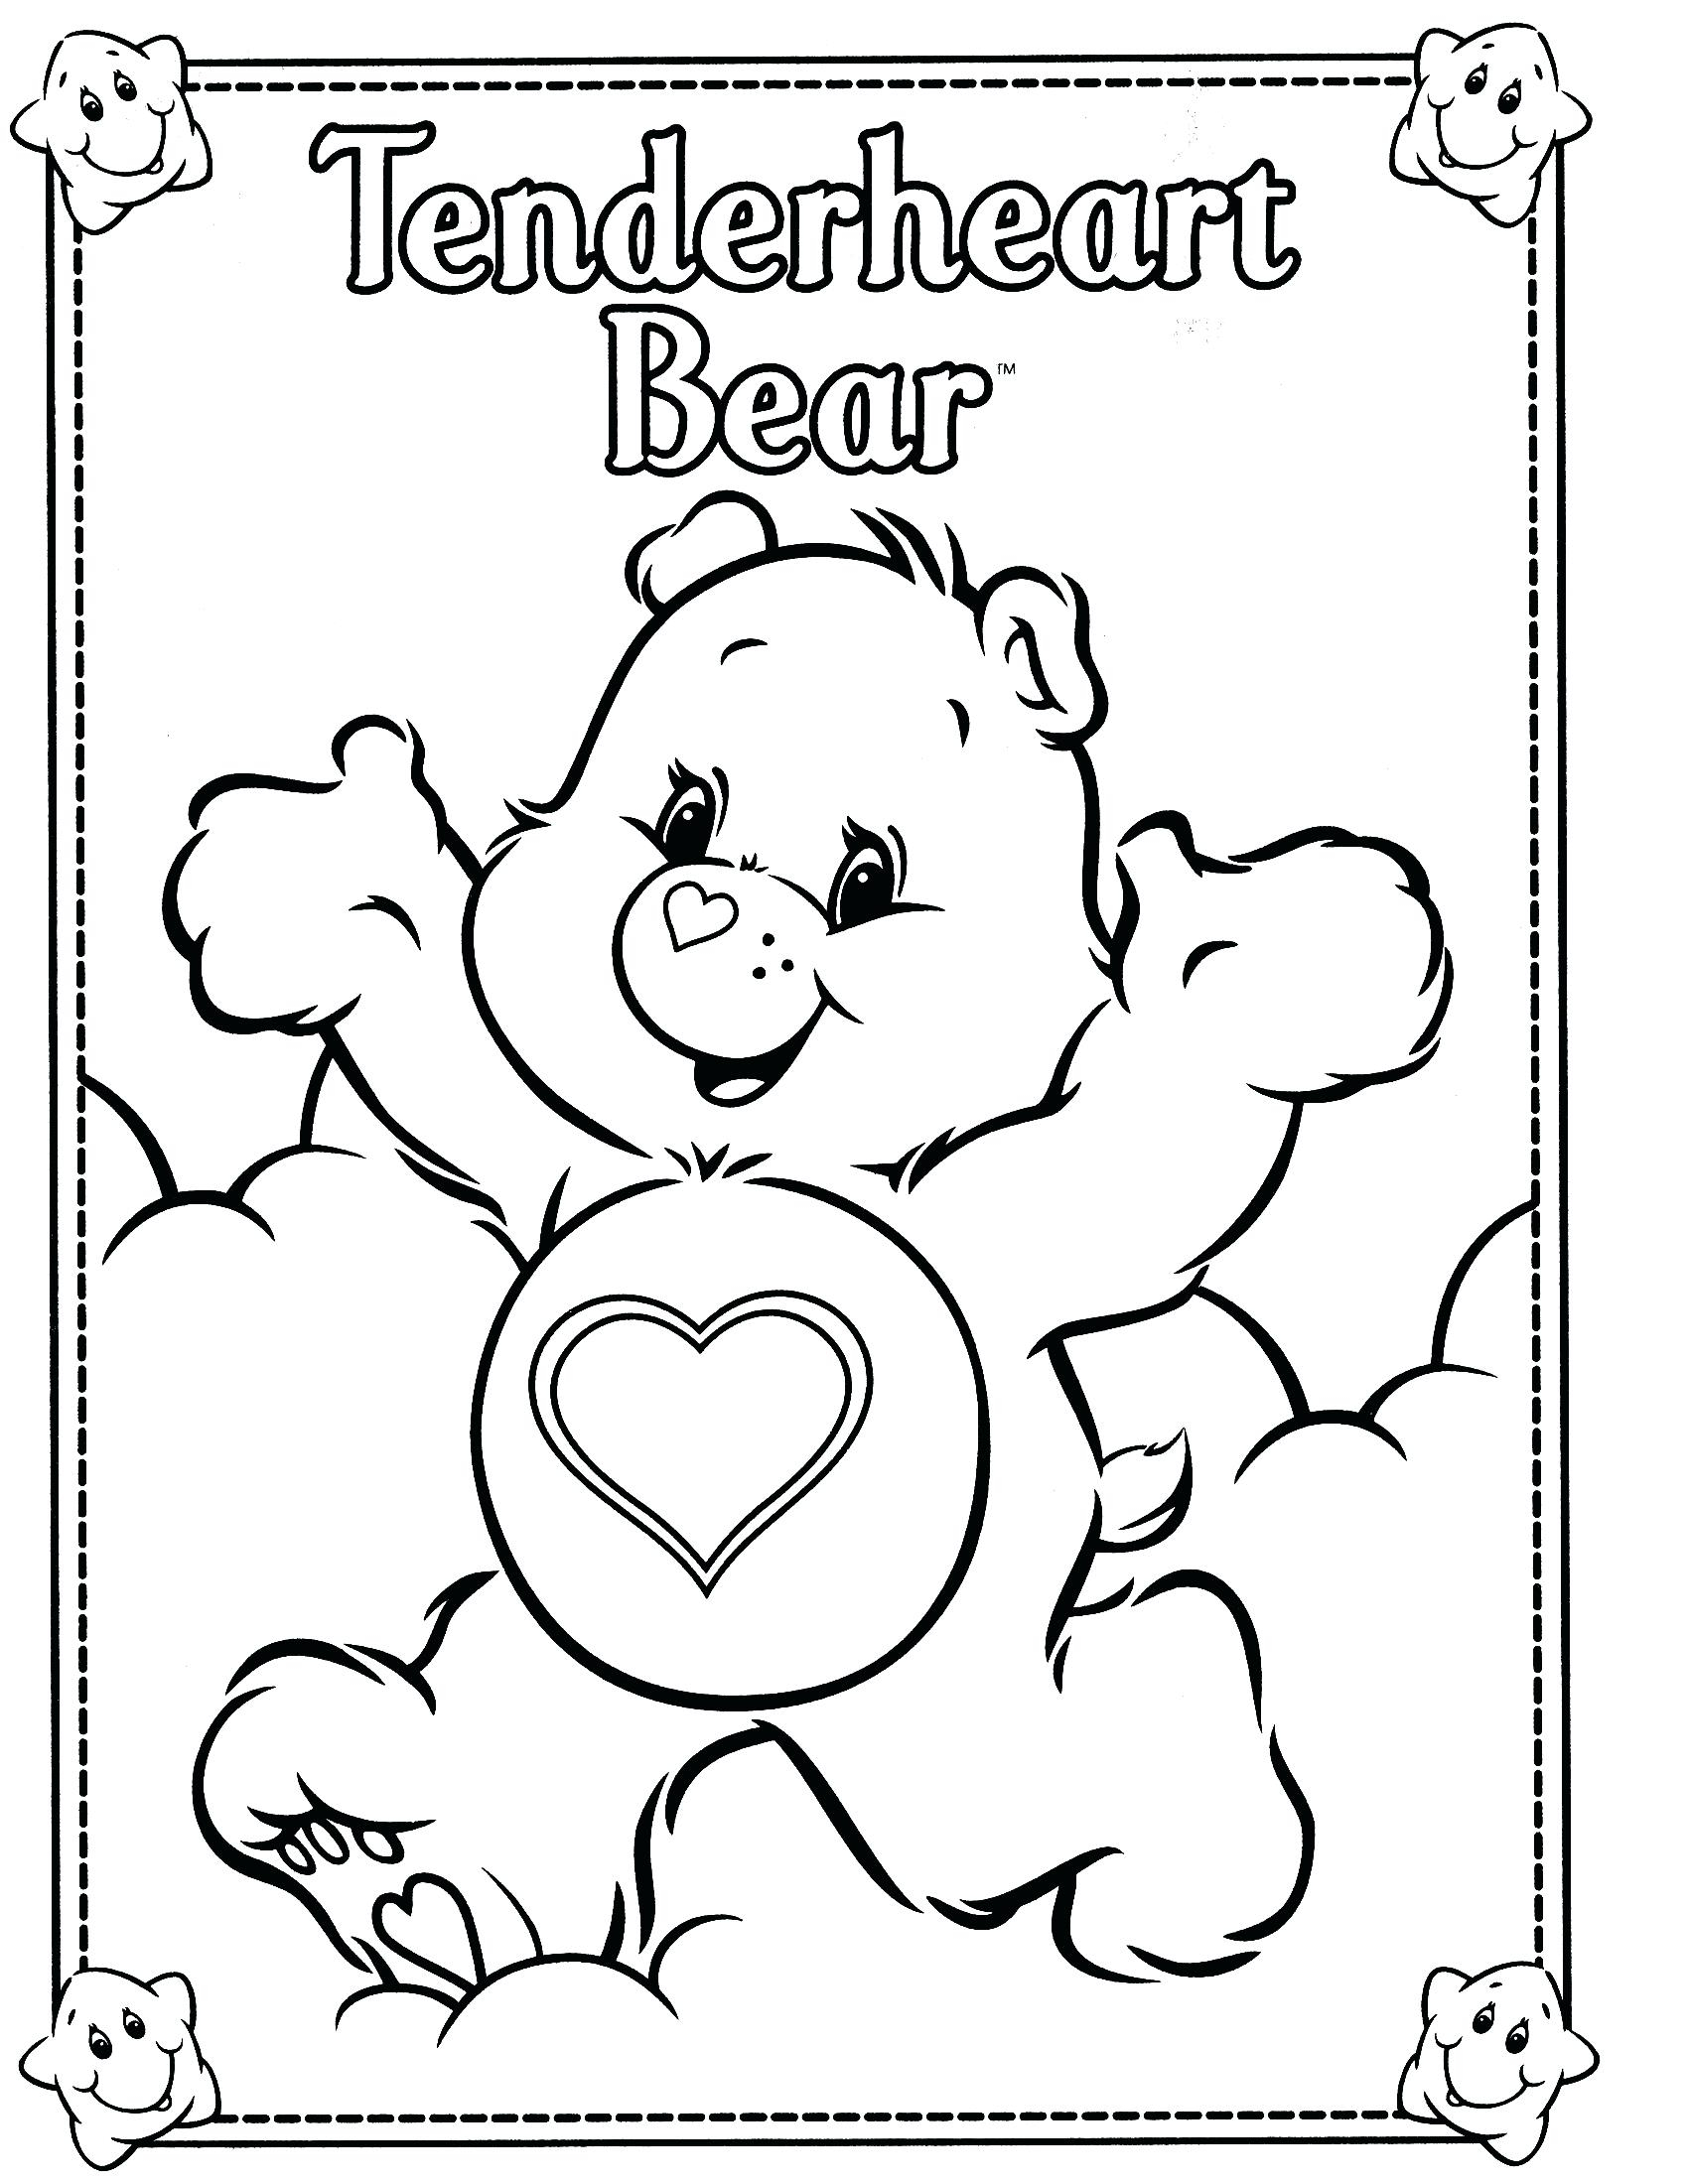 Smokey The Bear Coloring Pages Bear New Friend Printables Image 0 Bear New Friend Printables